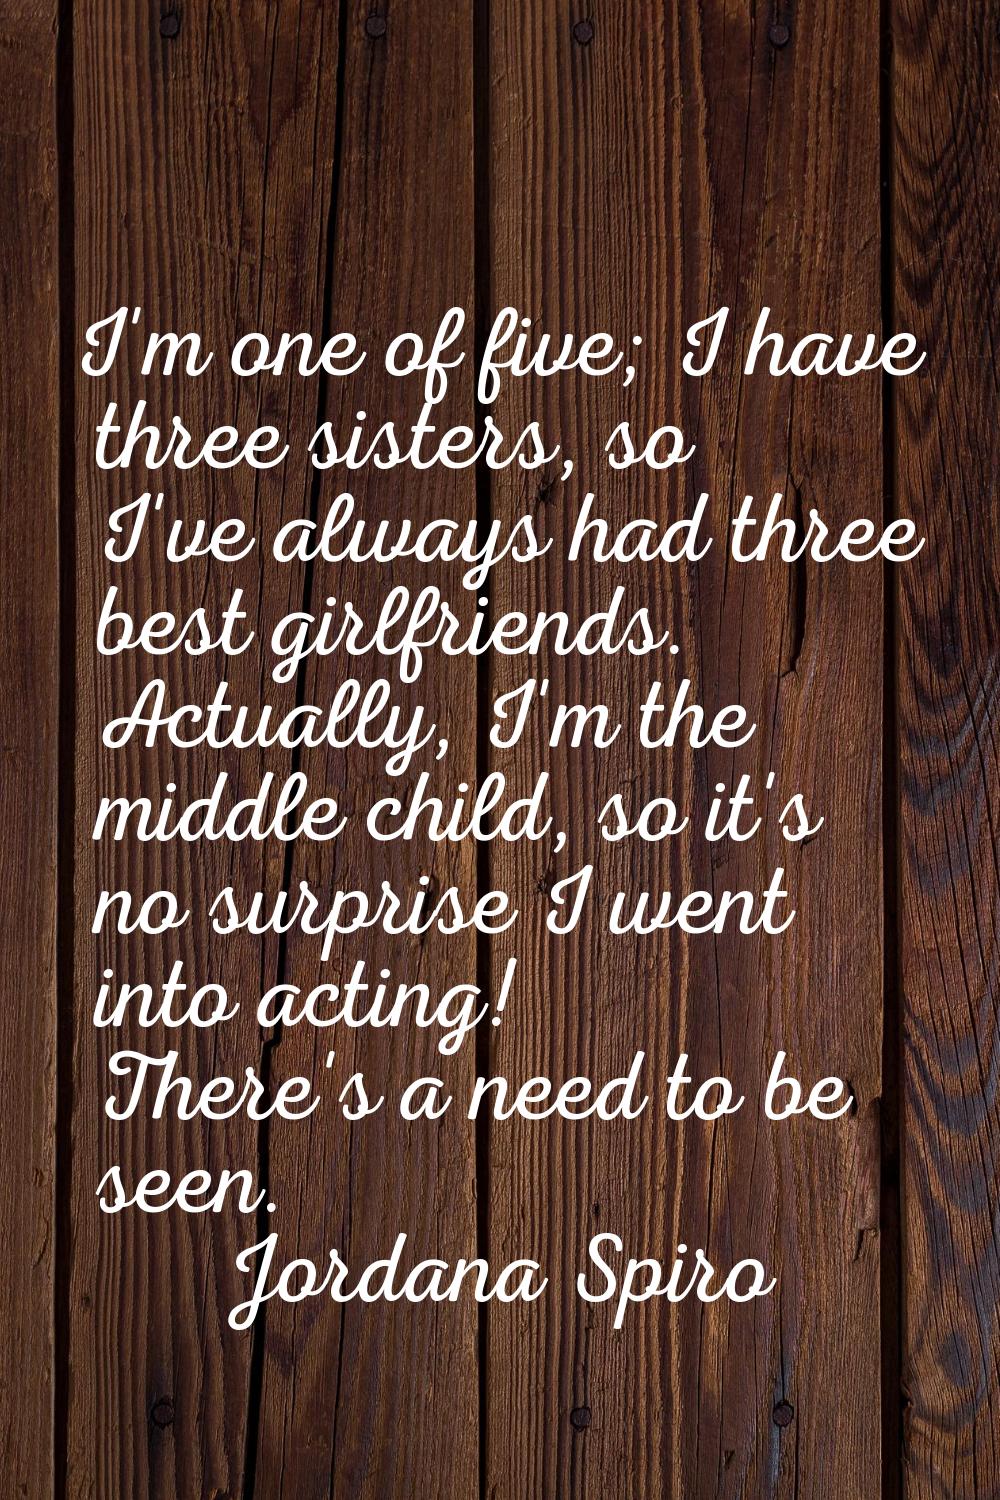 I'm one of five; I have three sisters, so I've always had three best girlfriends. Actually, I'm the